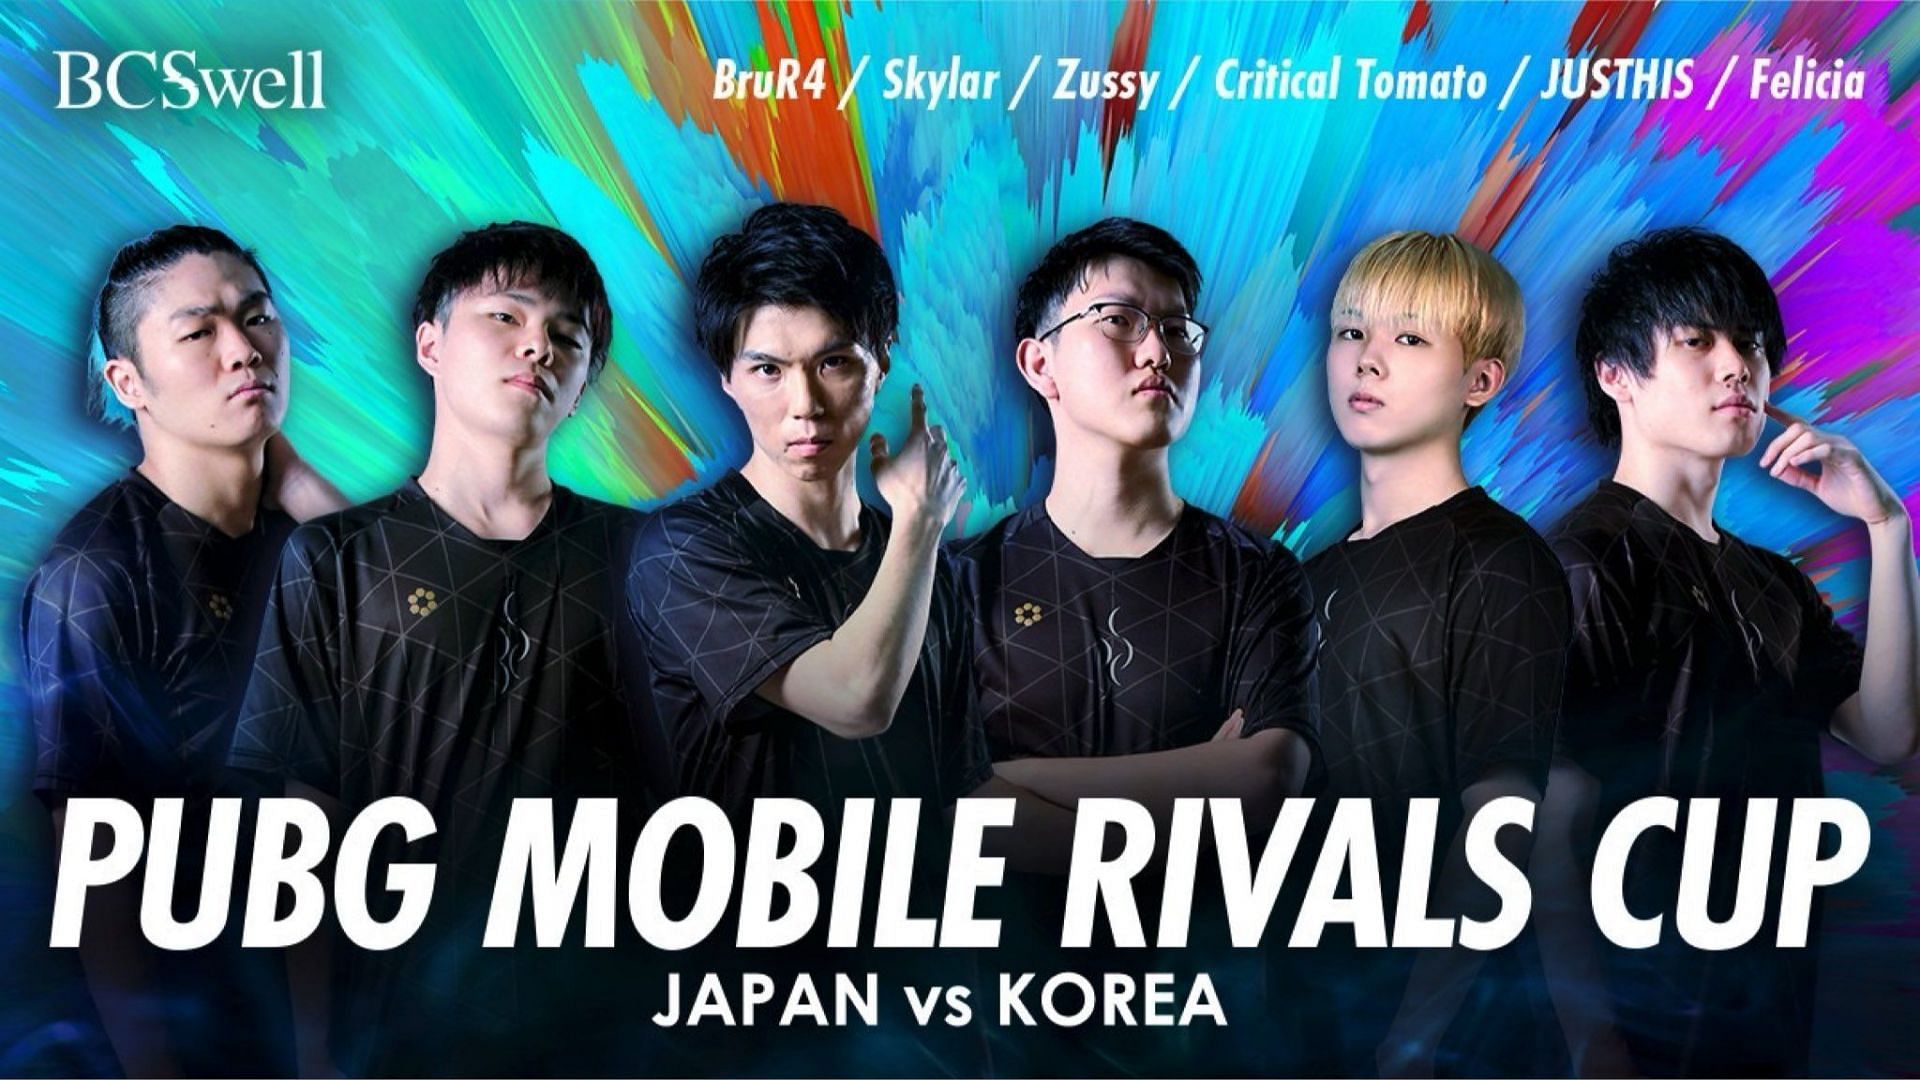 BC Swell crowned Champions of PUBG Mobile Rivals Cup (Image via BC Swell)